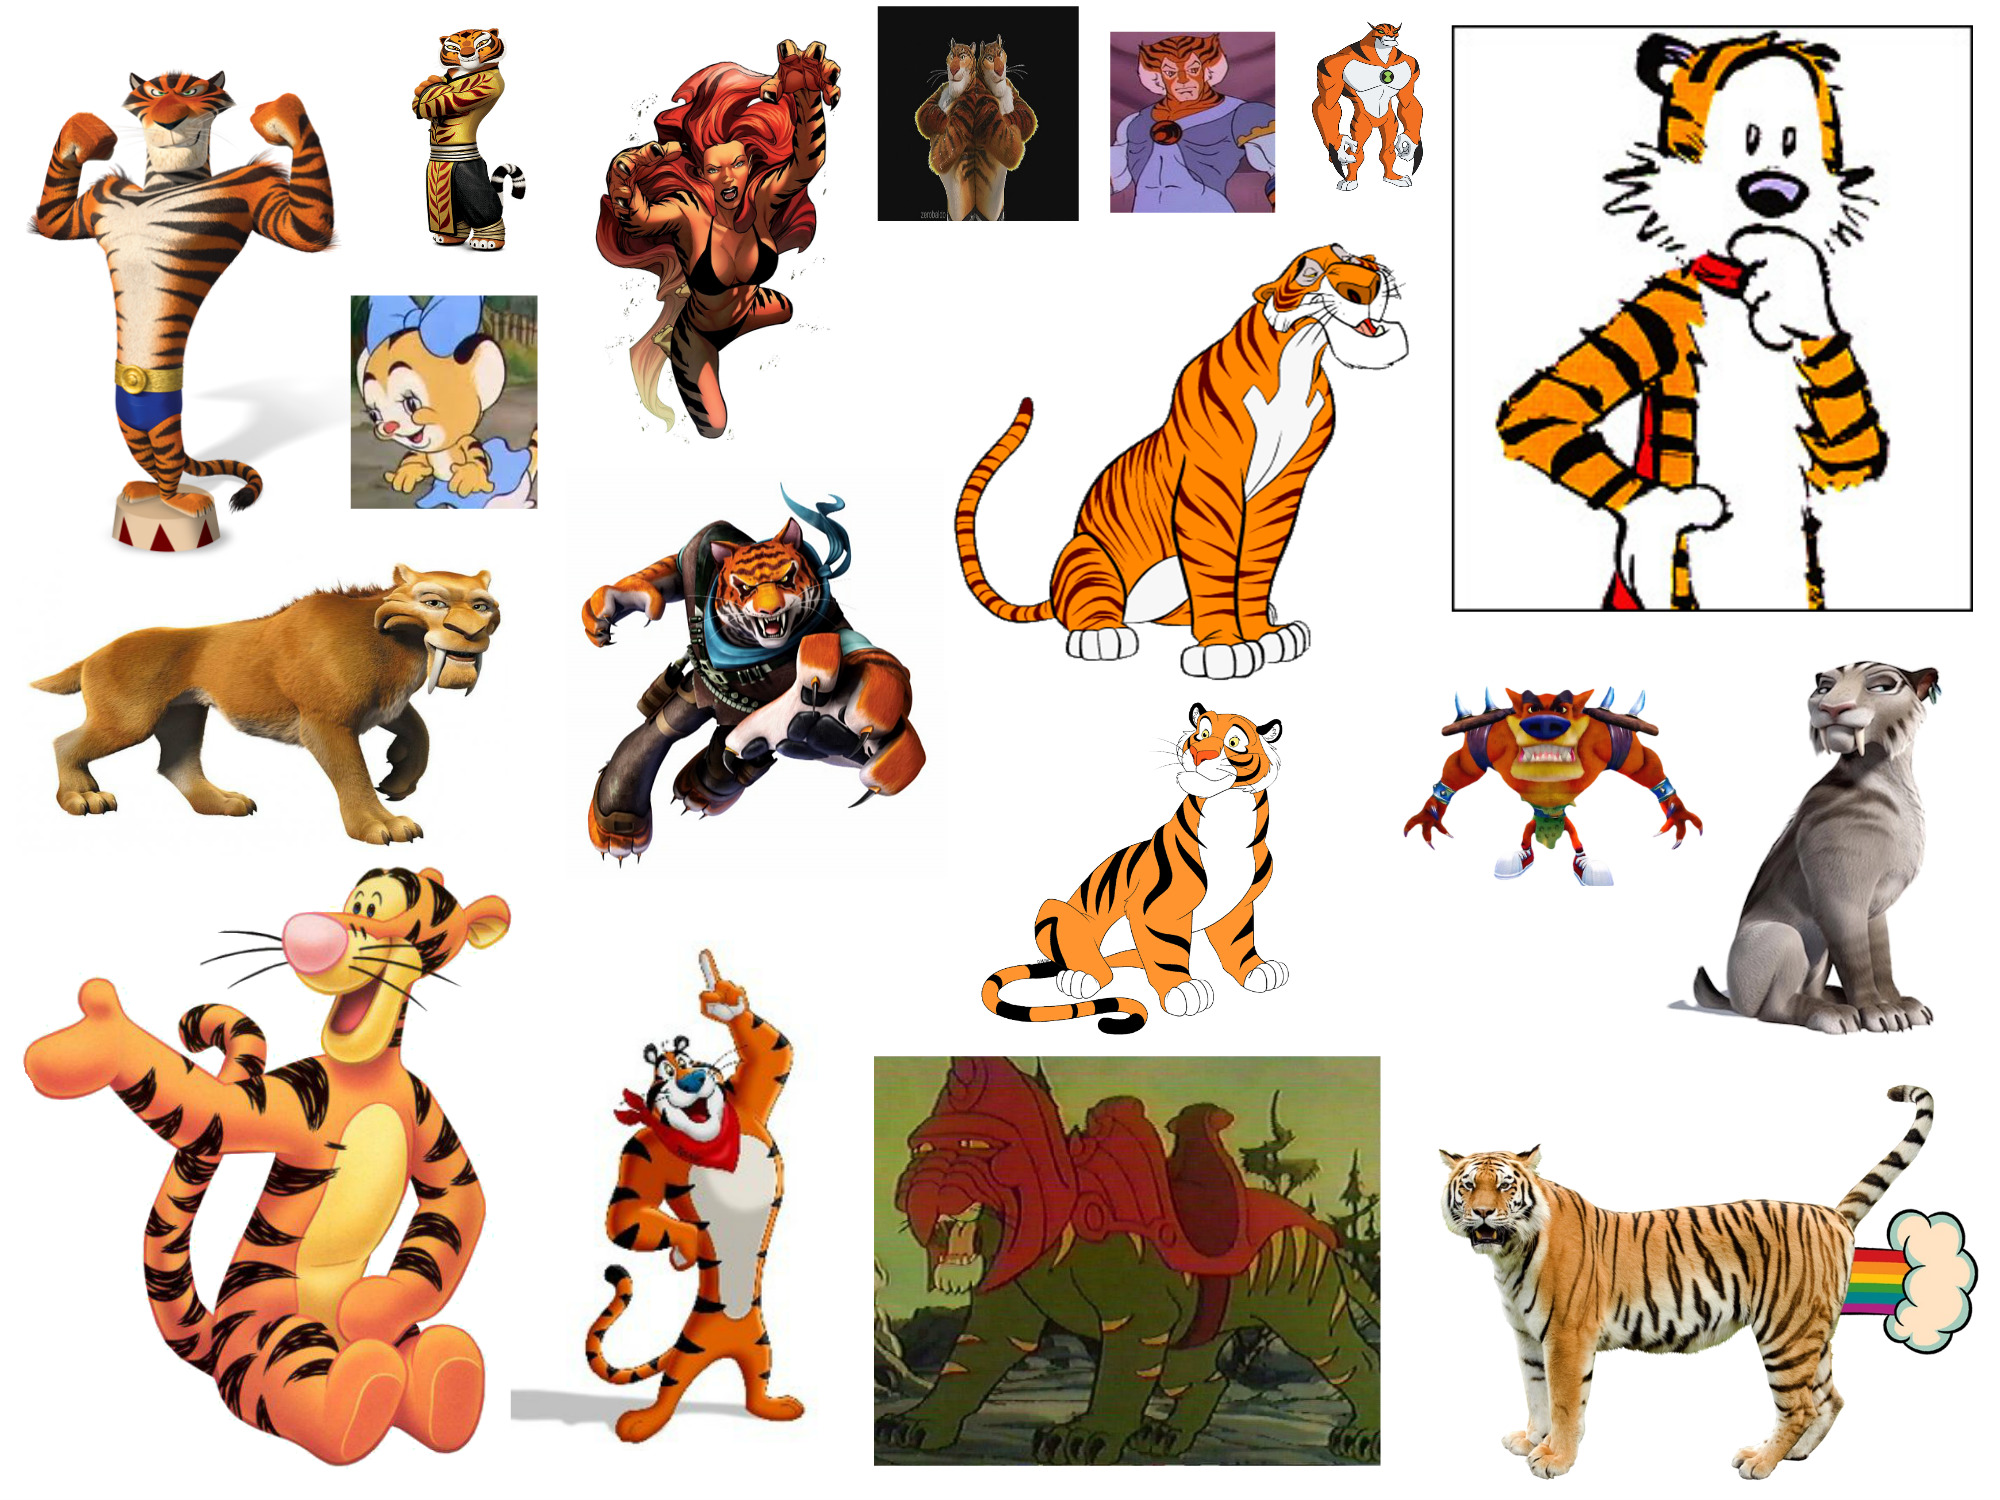 Animated Cartoon Tigers by Bart-Toons on DeviantArt